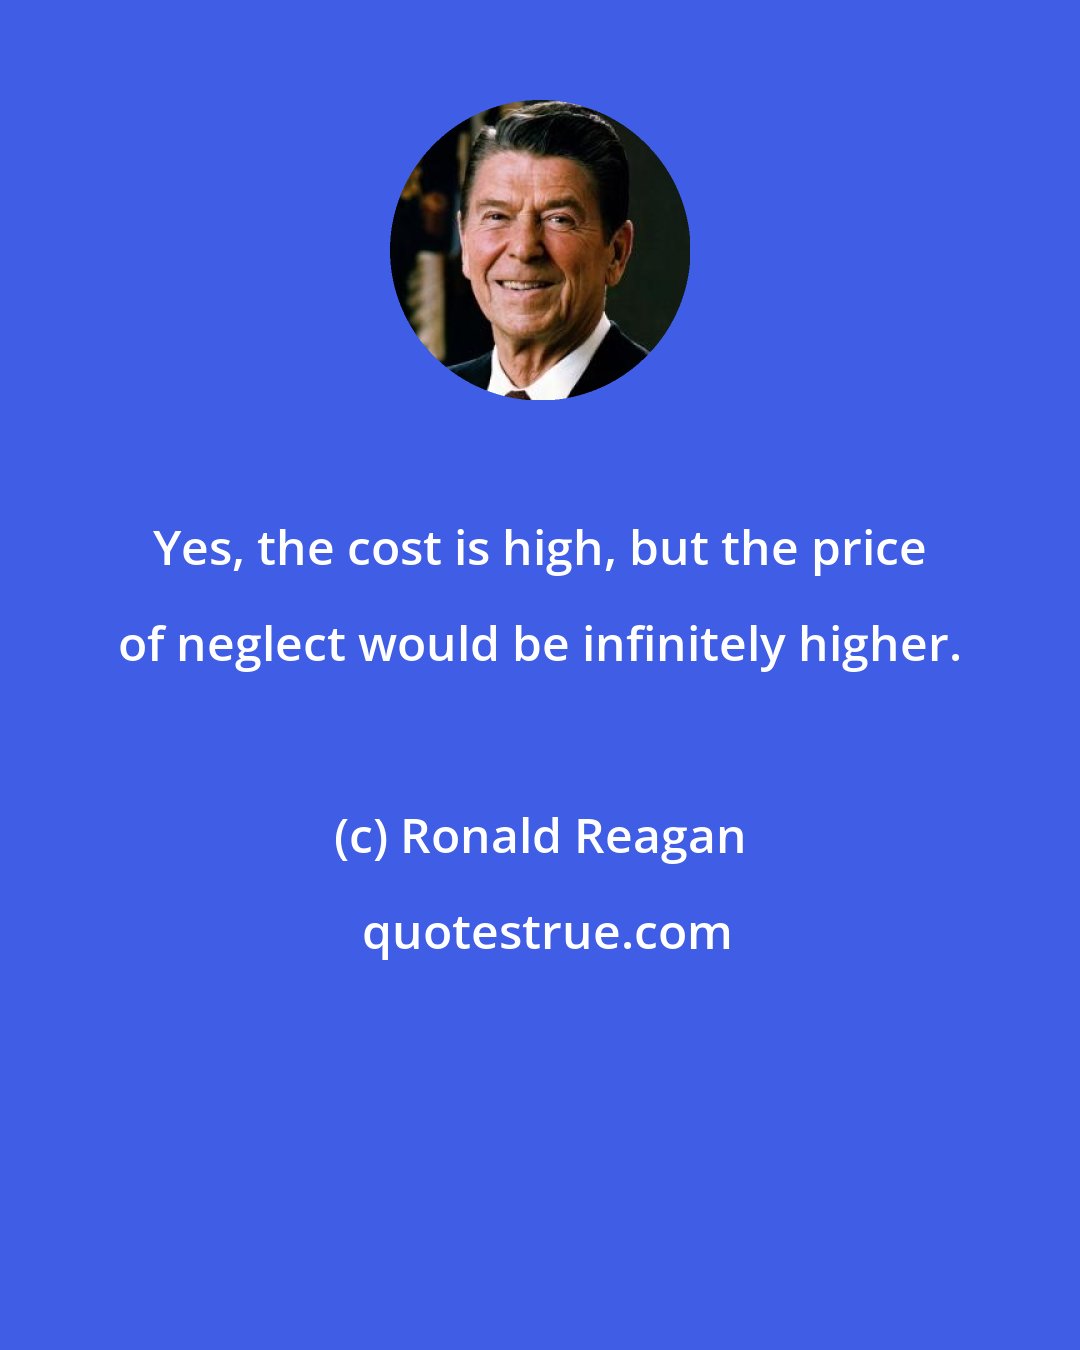 Ronald Reagan: Yes, the cost is high, but the price of neglect would be infinitely higher.